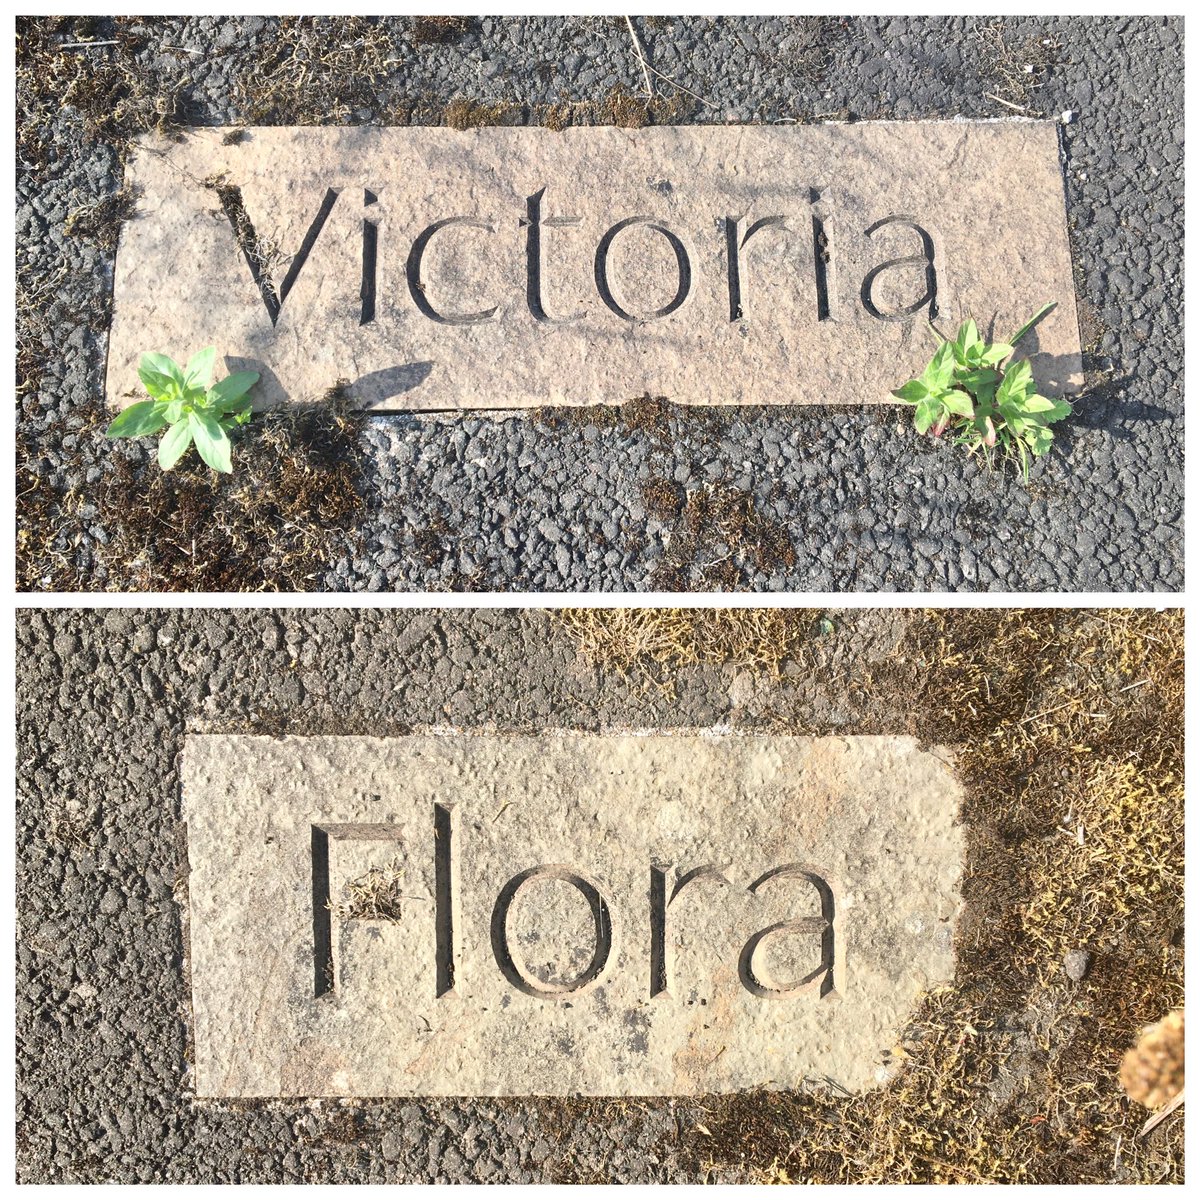 More Maryhill names today. These are on the pathway by the canal at Kelvin Dock, where Swan & Co built boats from the 1840s to the 1940s. Some had female names. Not sure who Flora was called after (MacDonald?) , but I bet I know who Victoria was!  #WomenMakeHistory  @womenslibrary